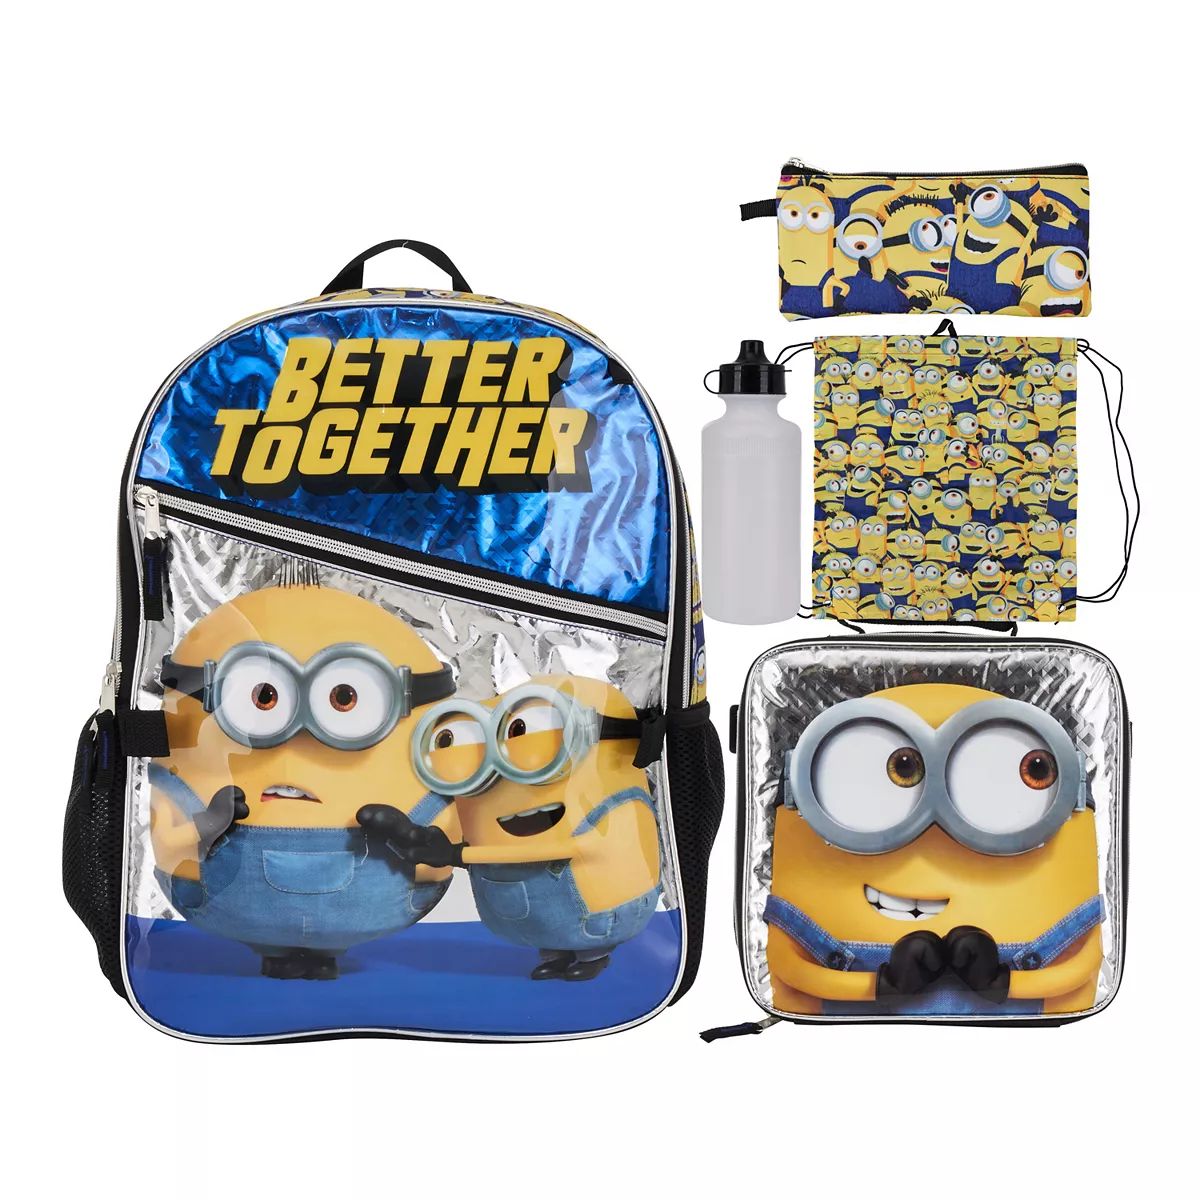 Despicable Me Minions 5-piece "Better Together" Backpack Set | Kohl's